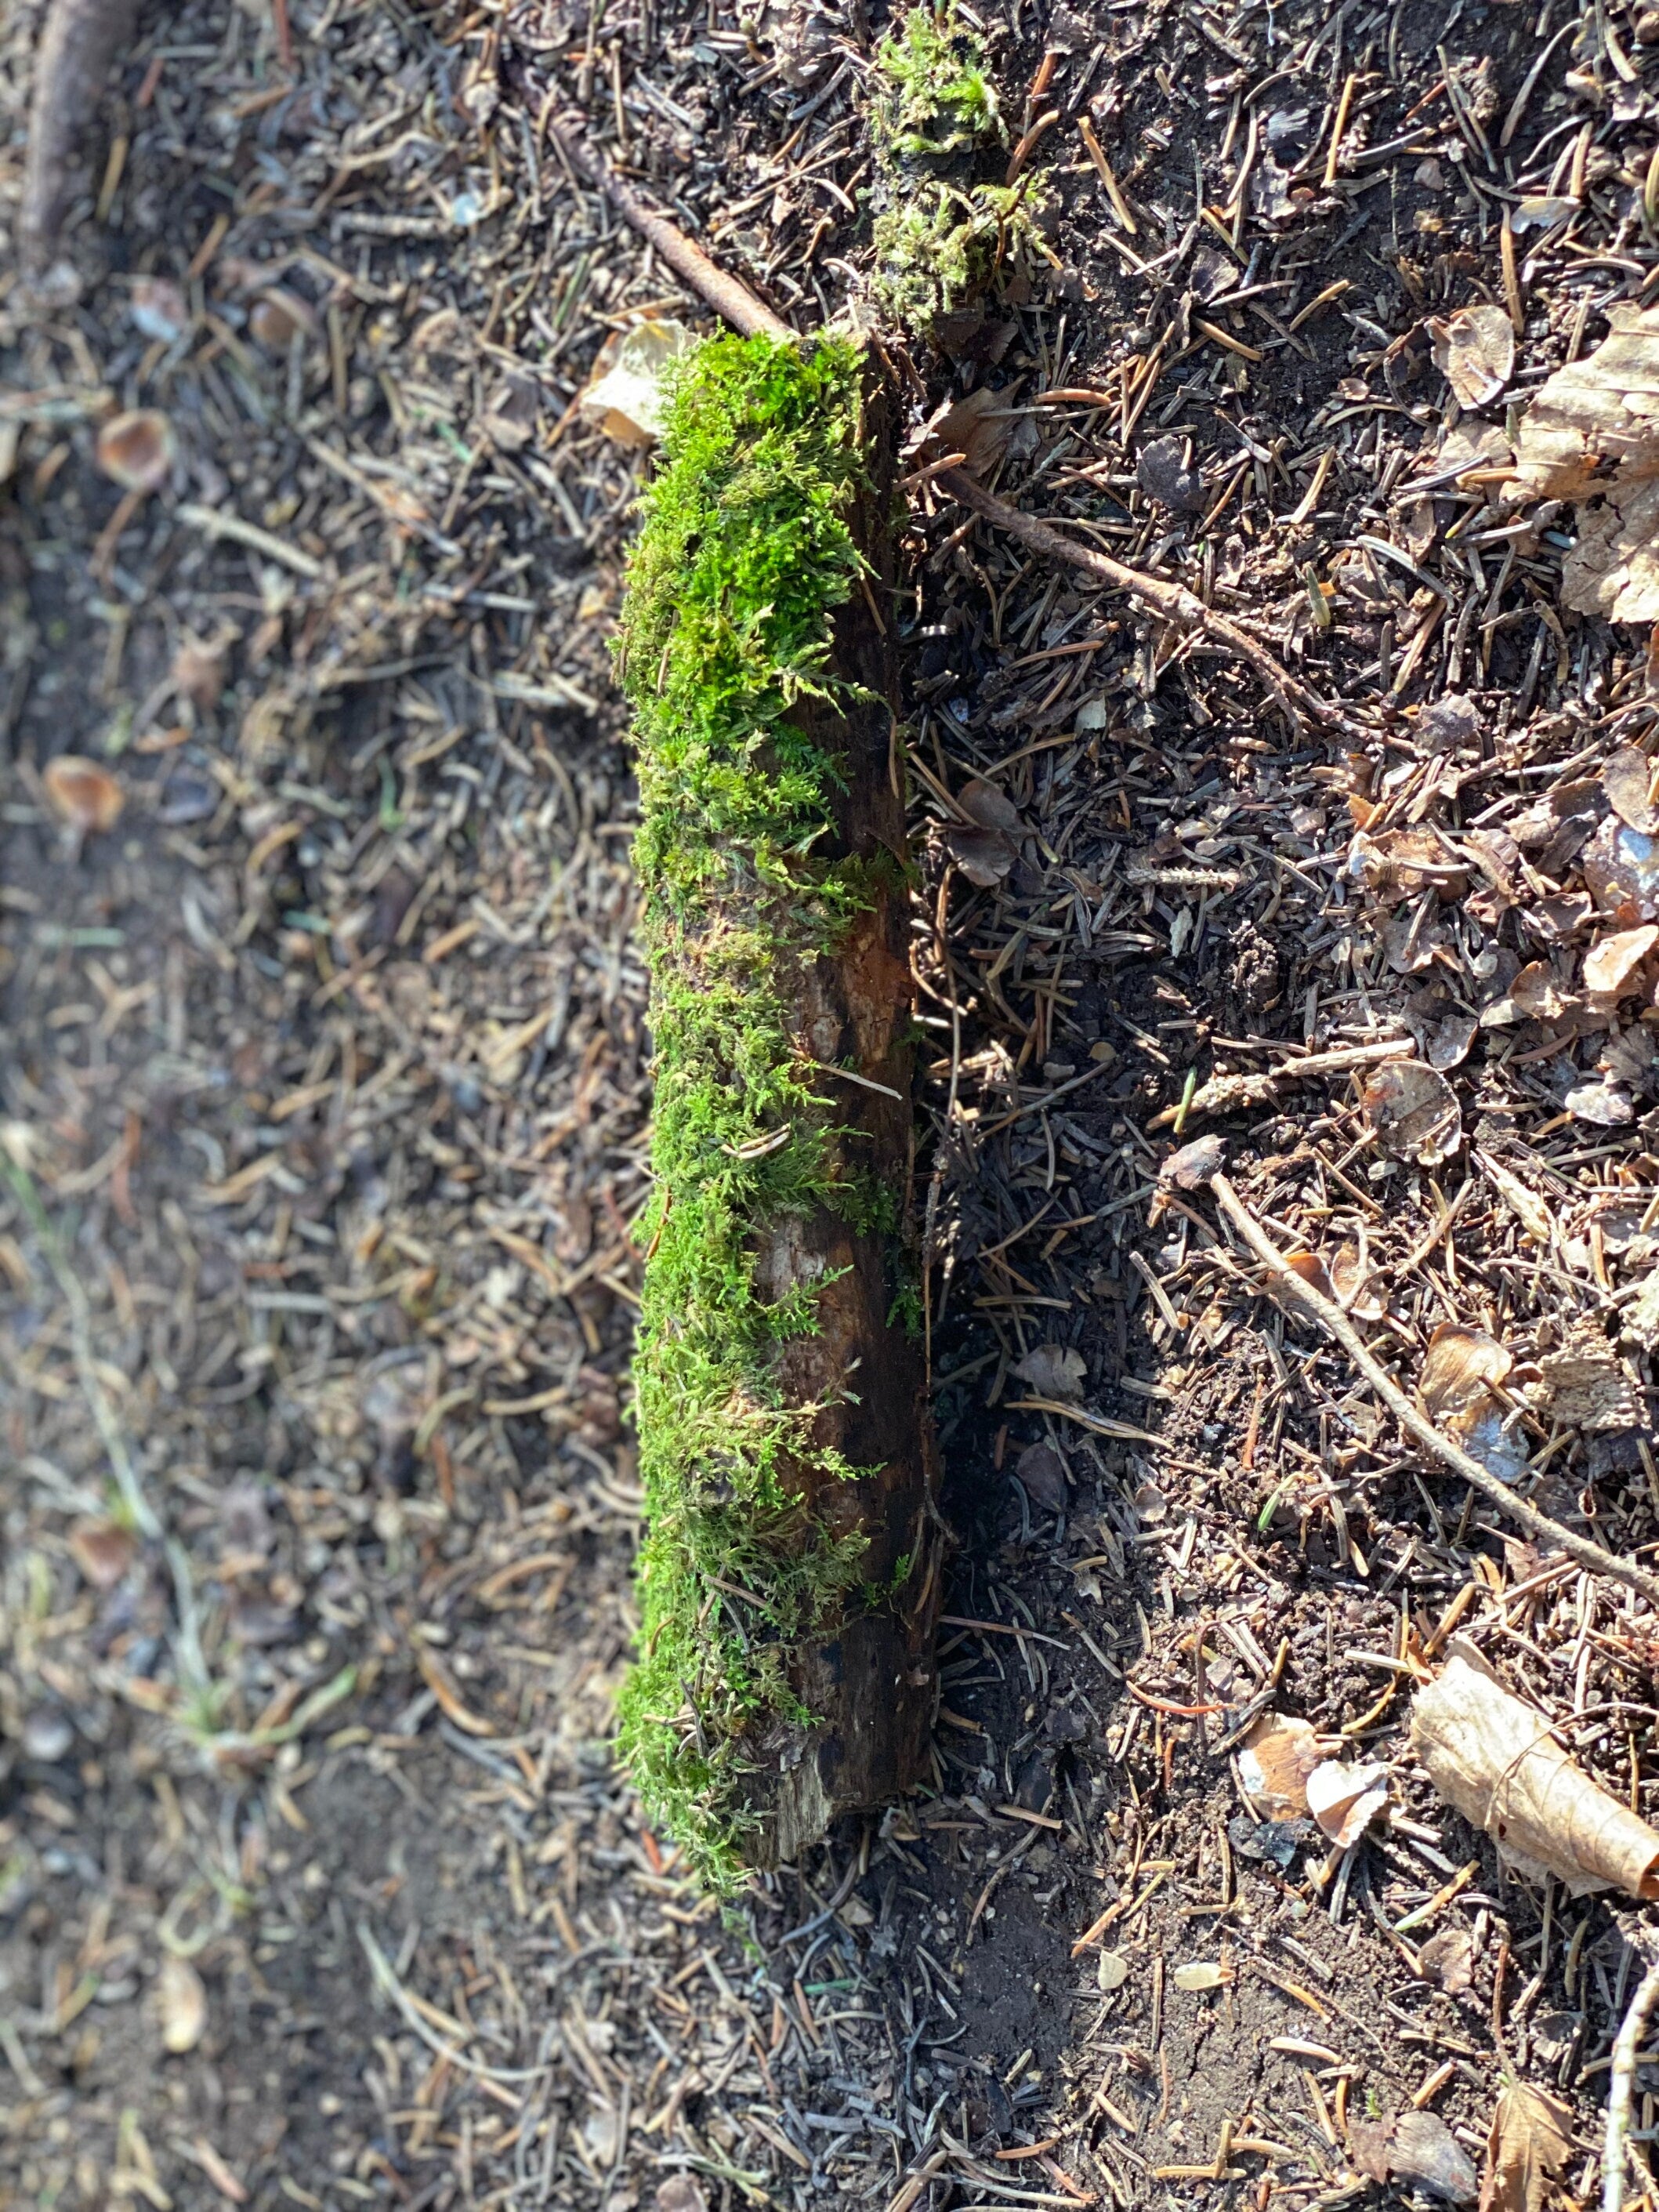 Live Moss Stick, Mossy Stick Approximately 9 Inches Long x 2 Inches Wide x About 2 Inches High